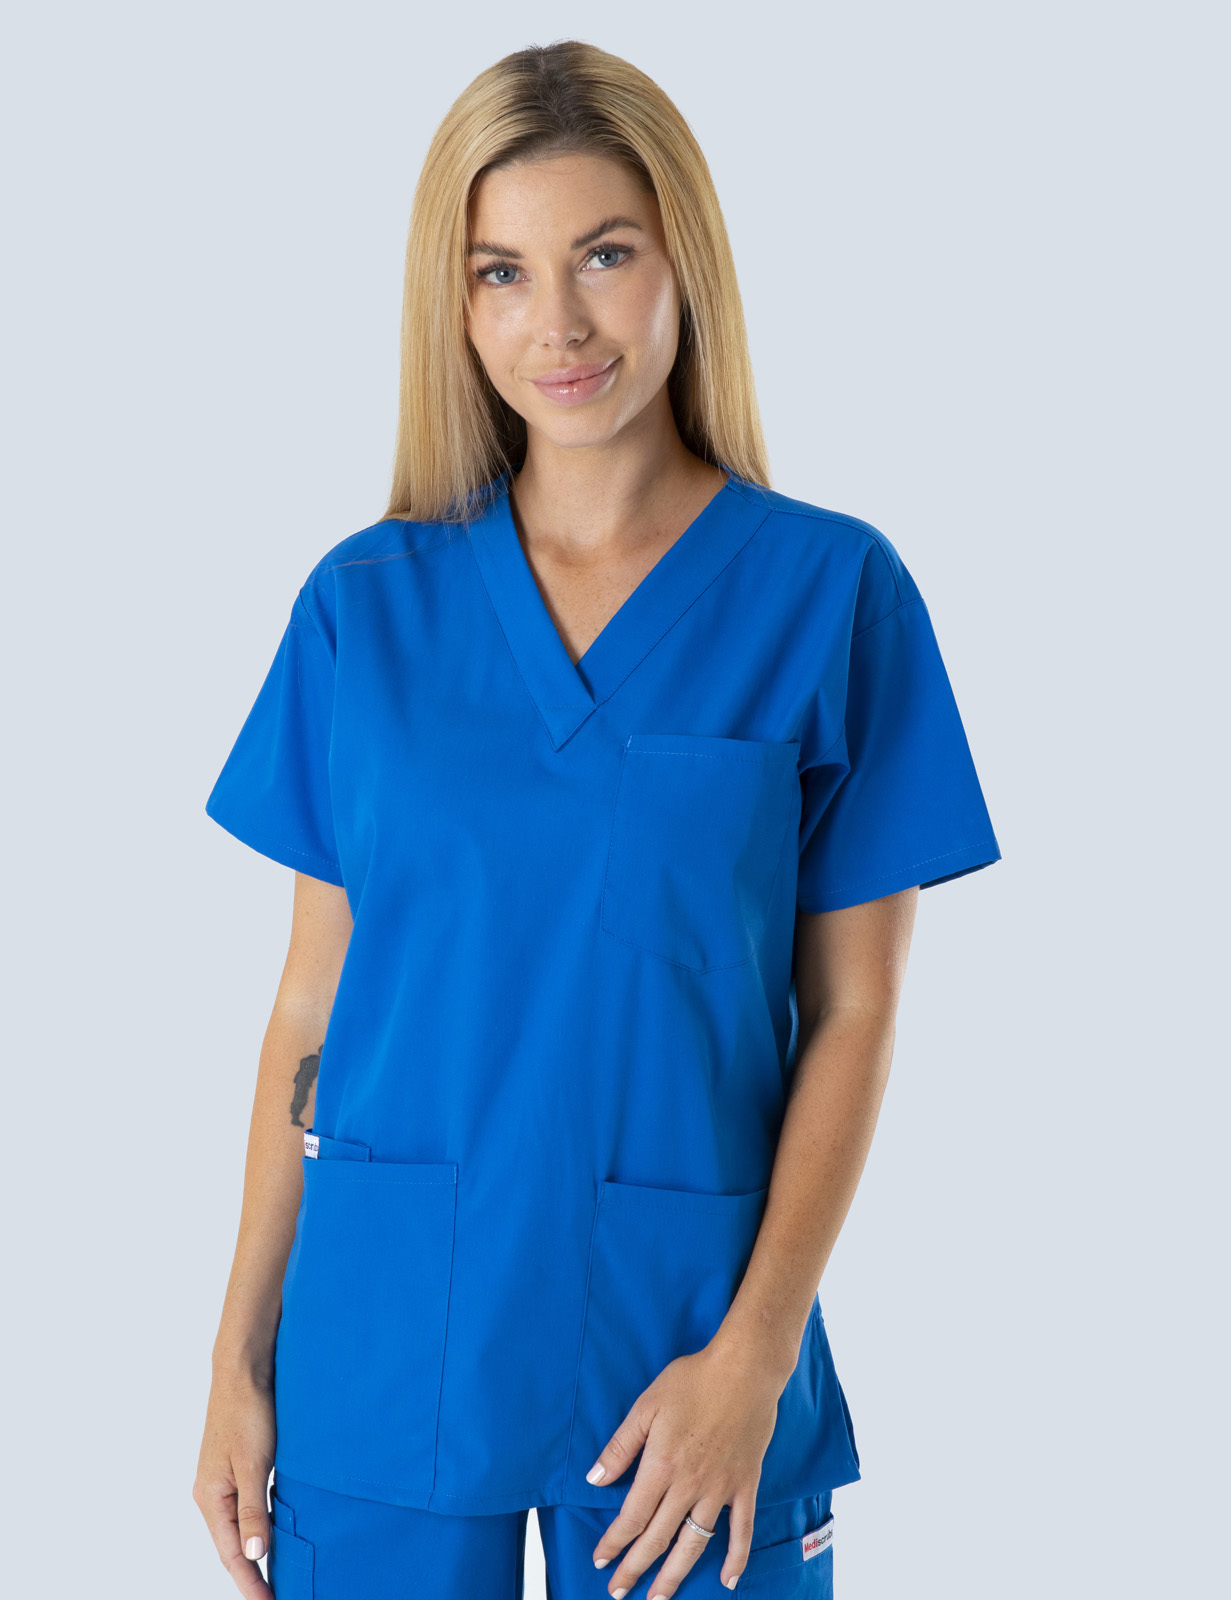 Mayfield Aged Care - AIN (4 Pocket Scrub Top in Royal incl Logos)